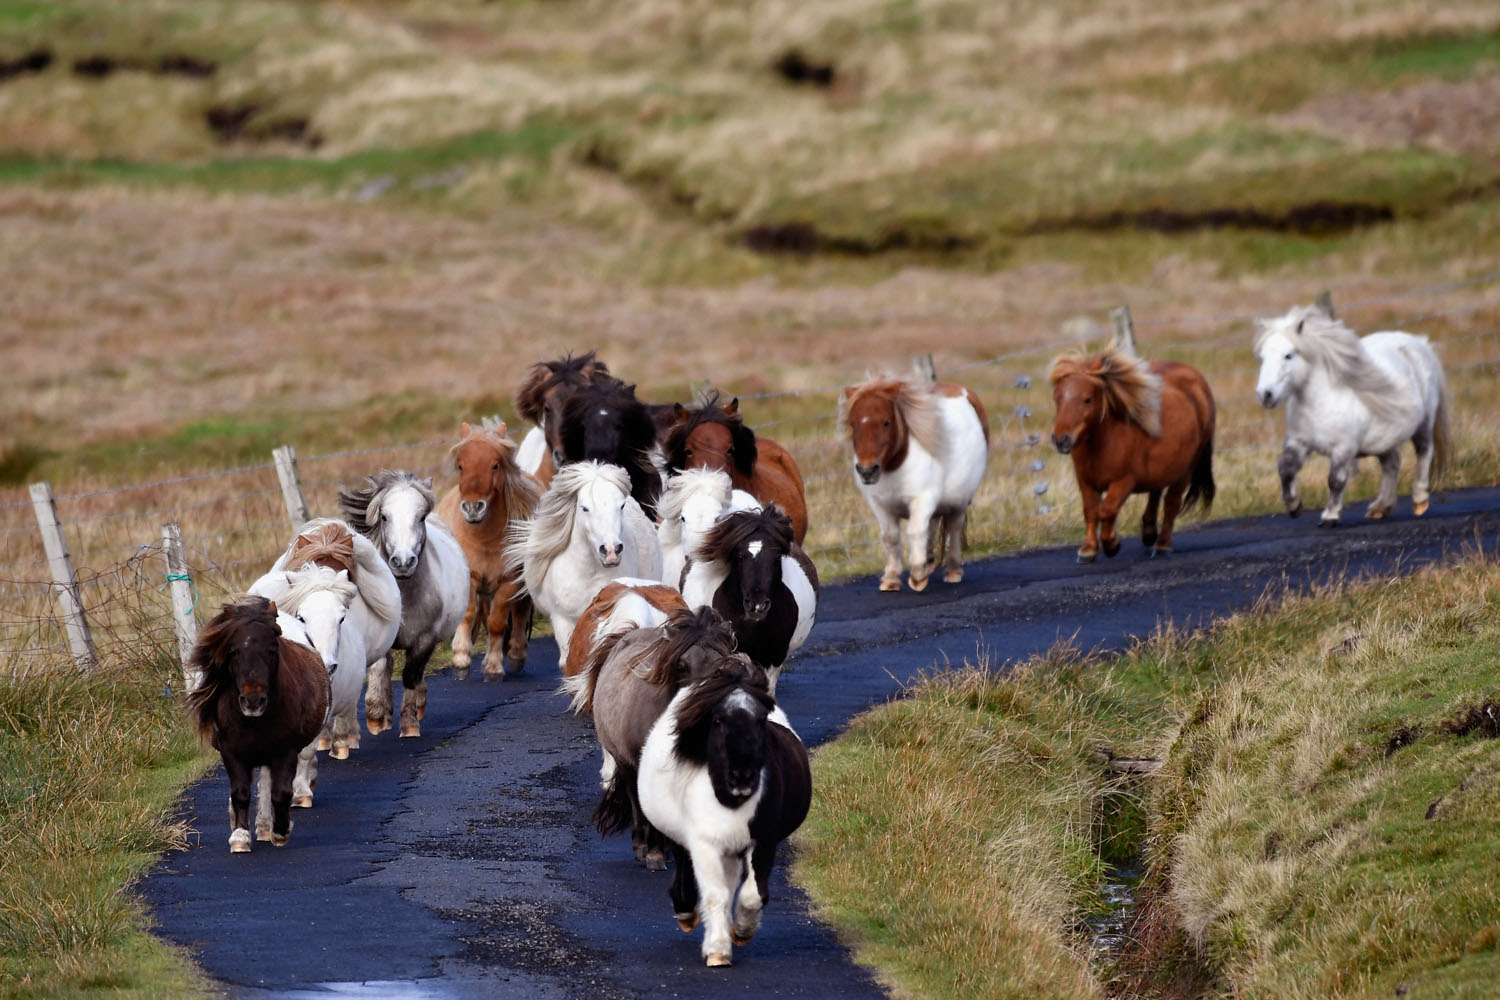 FOULA, SCOTLAND - OCTOBER 01:  Ponies run free on the Island of Foula on October 1, 2016 in Foula, Scotland. Foula is the remotest inhabited island in Great Britain with a current population of thirty people and has been owned since the turn of the 20th century by the Holbourn family.  (Photo by Jeff J Mitchell/Getty Images)